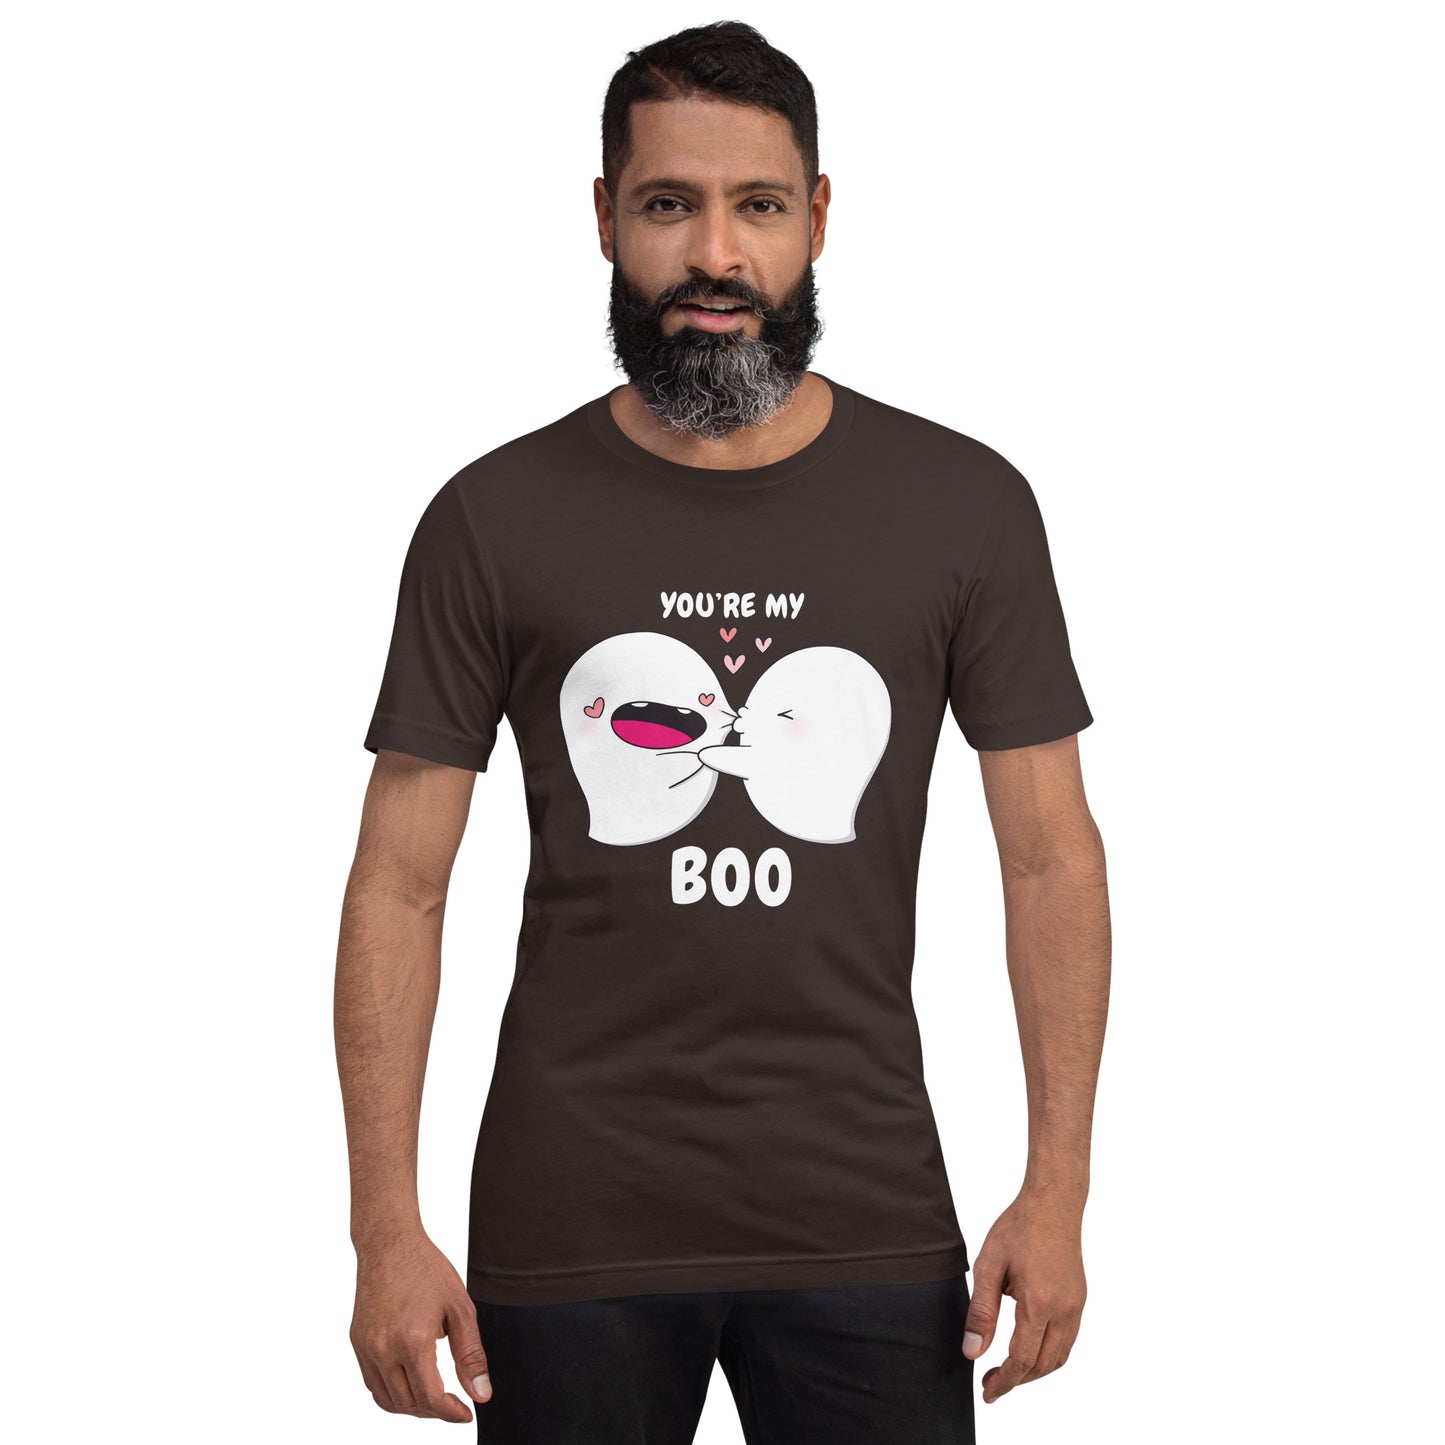 You're my boo - Unisex t-shirt